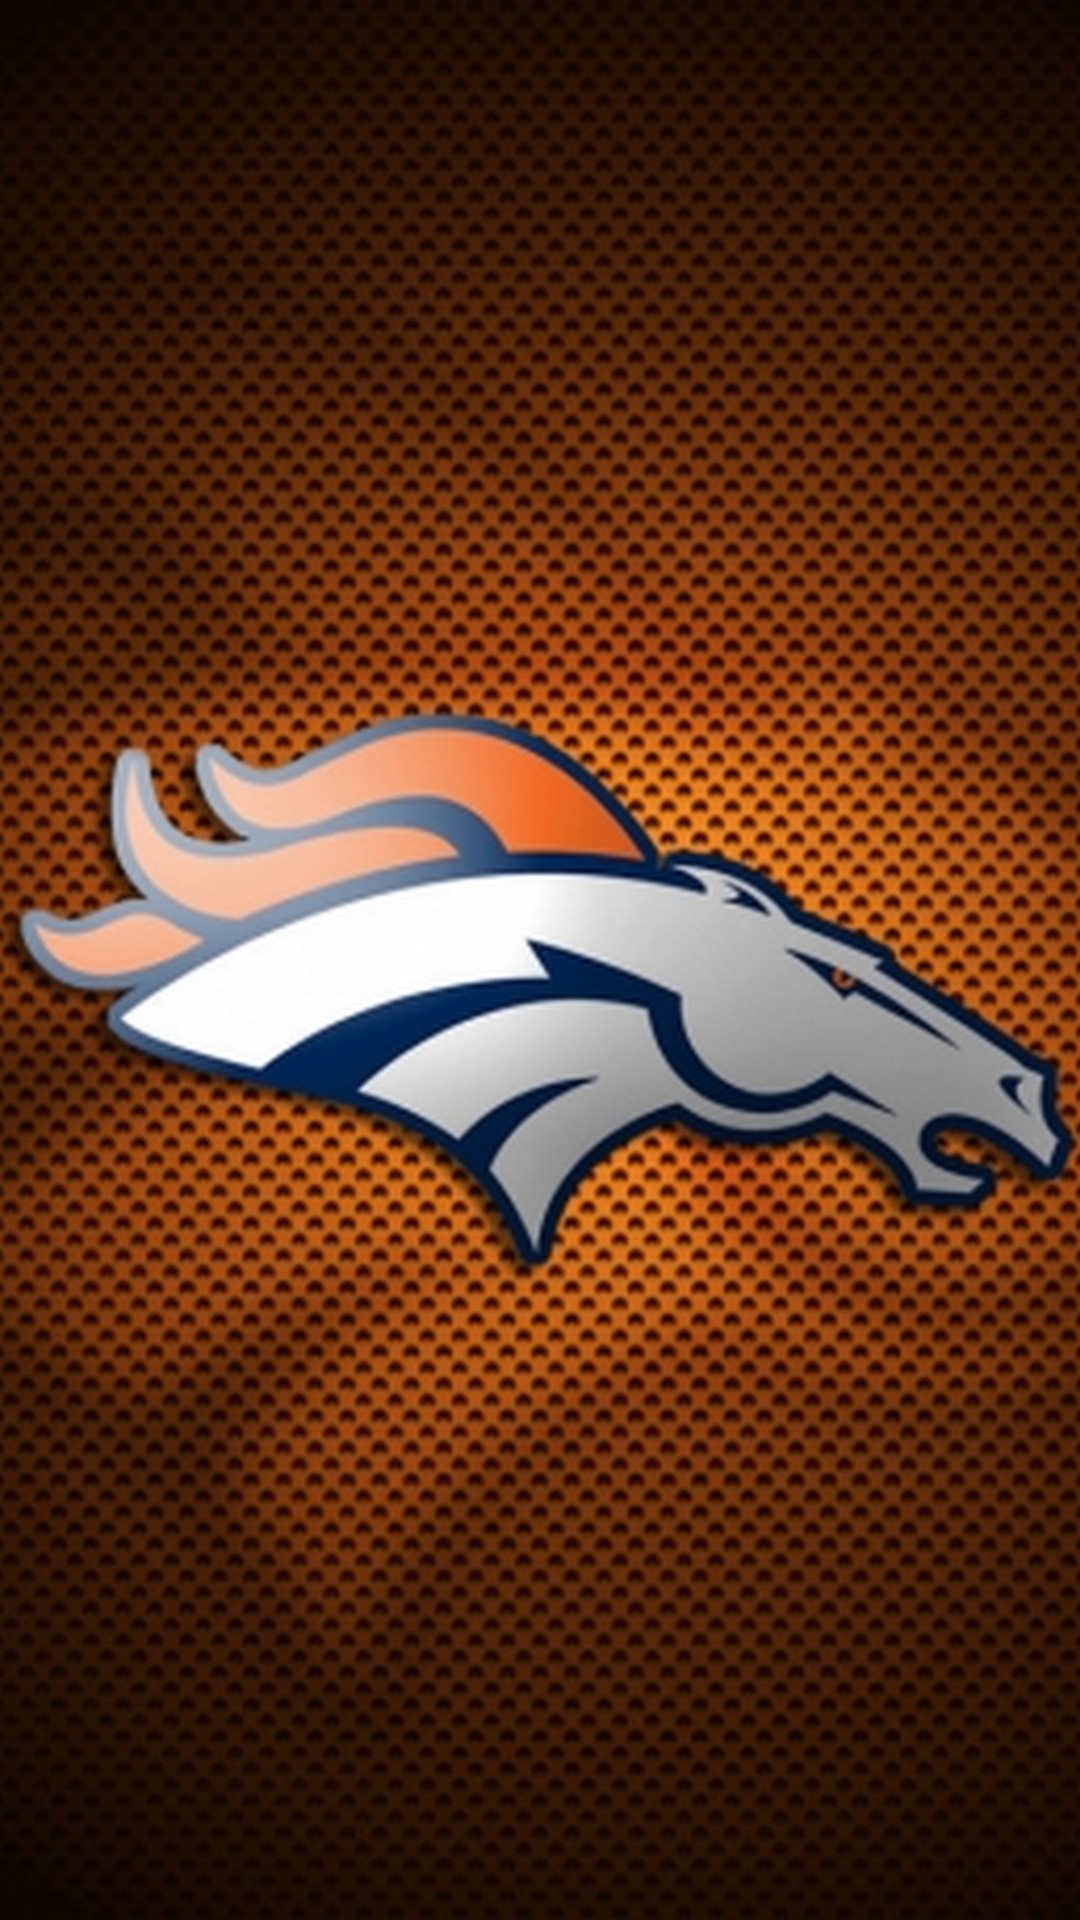 Denver Broncos iPhone 6s Plus Wallpaper with high-resolution 1080x1920 pixel. Download and set as wallpaper for Apple iPhone X, XS Max, XR, 8, 7, 6, SE, iPad, Android